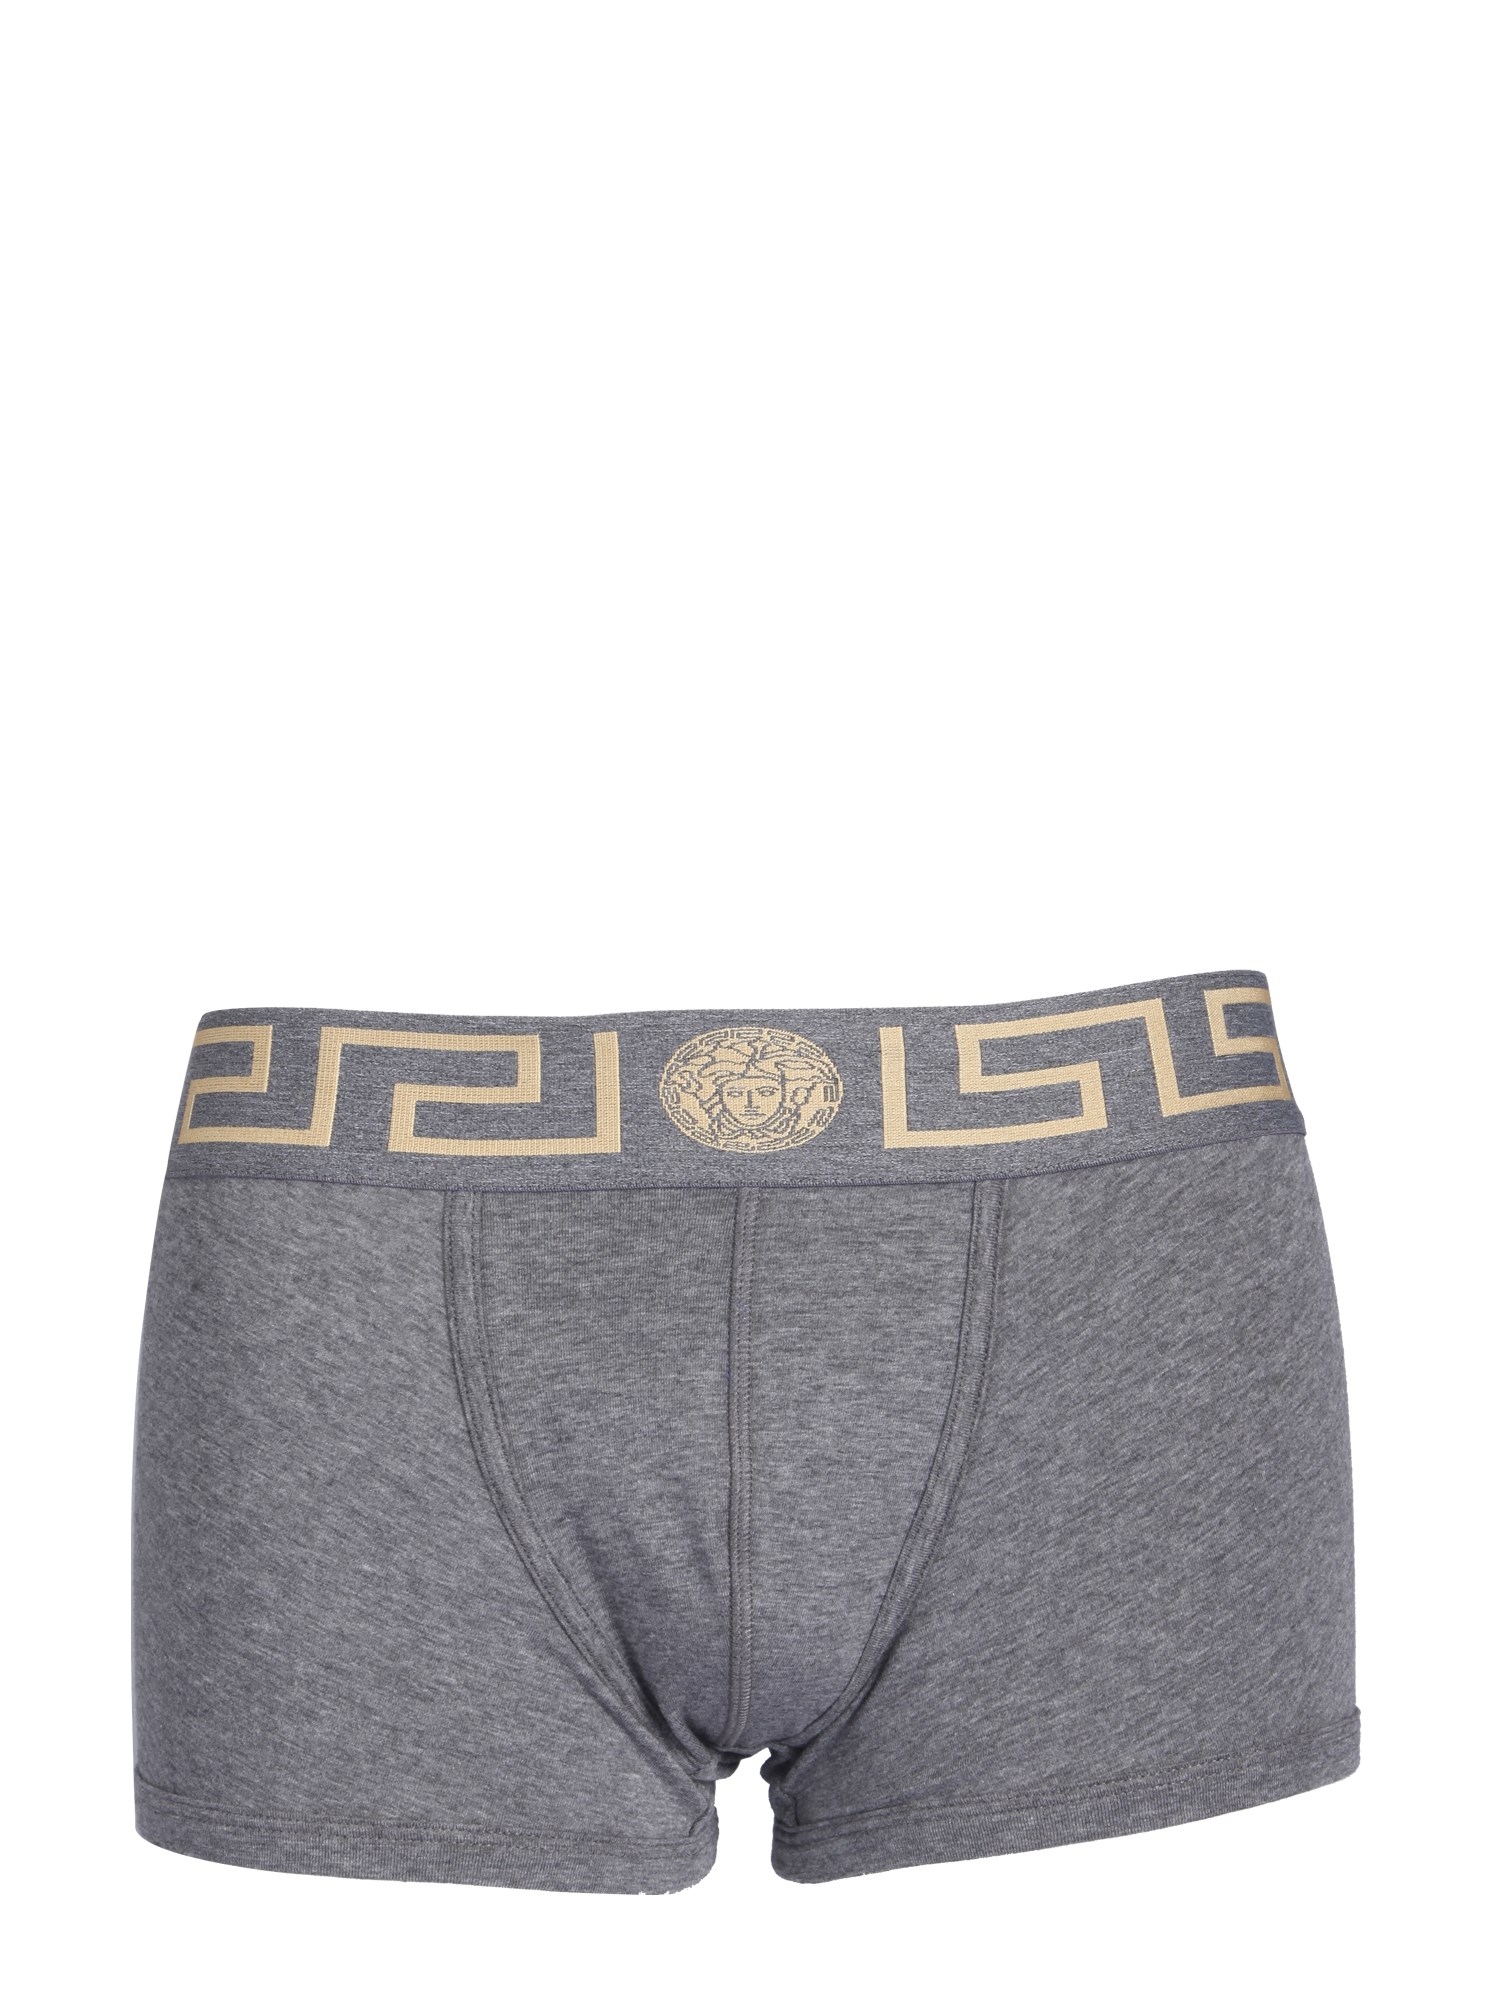 Versace Boxer Shorts With Greek In Grey | ModeSens